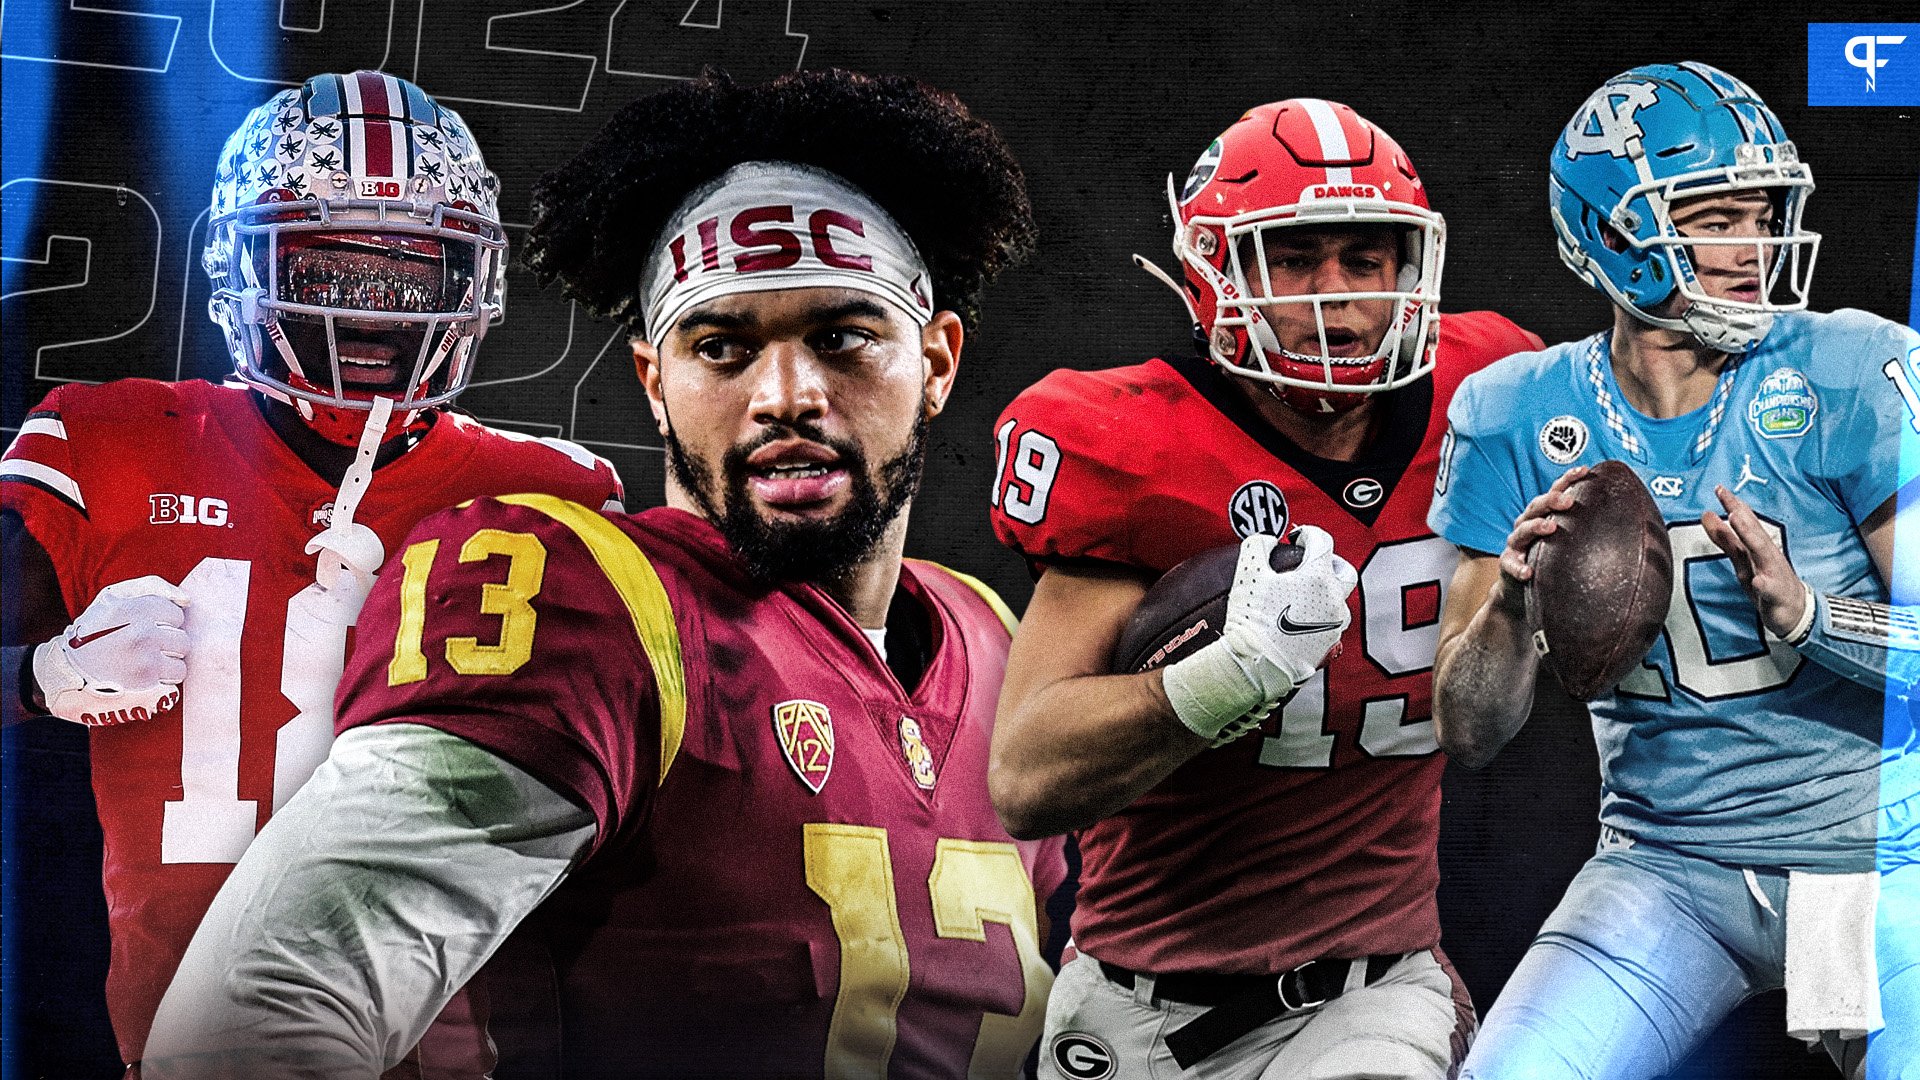 2022 nfl prospect rankings by position